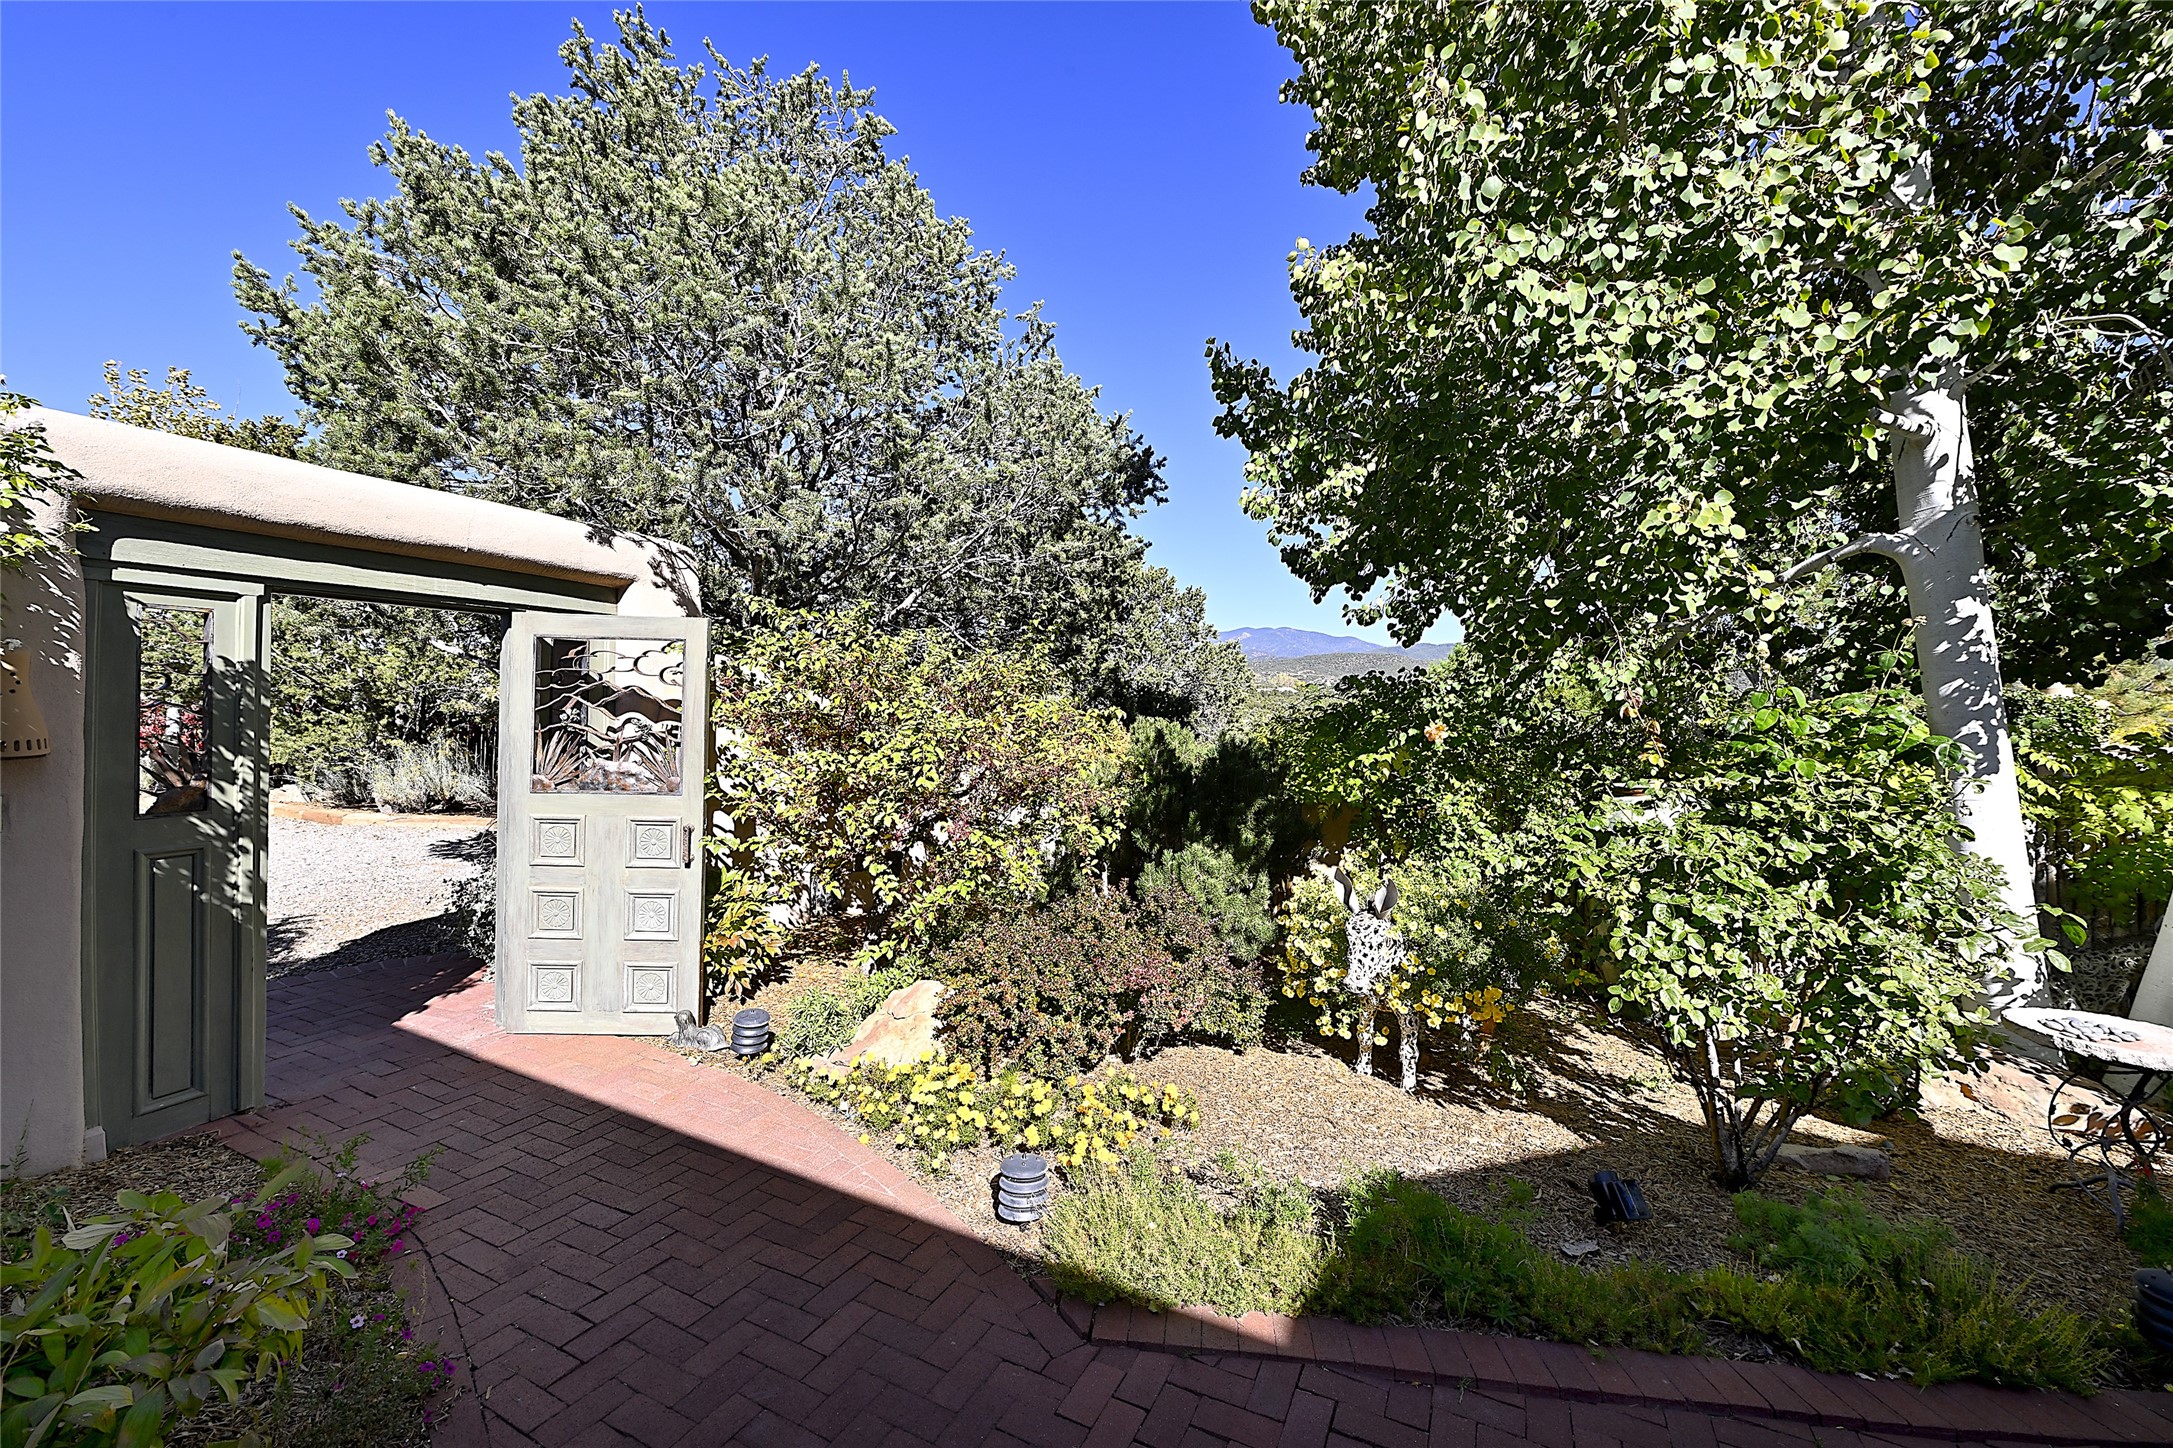 This property occupies an enviable hillside spot strewn with mature native trees and foliage. Its multiple courtyards have been colorfully landscaped;